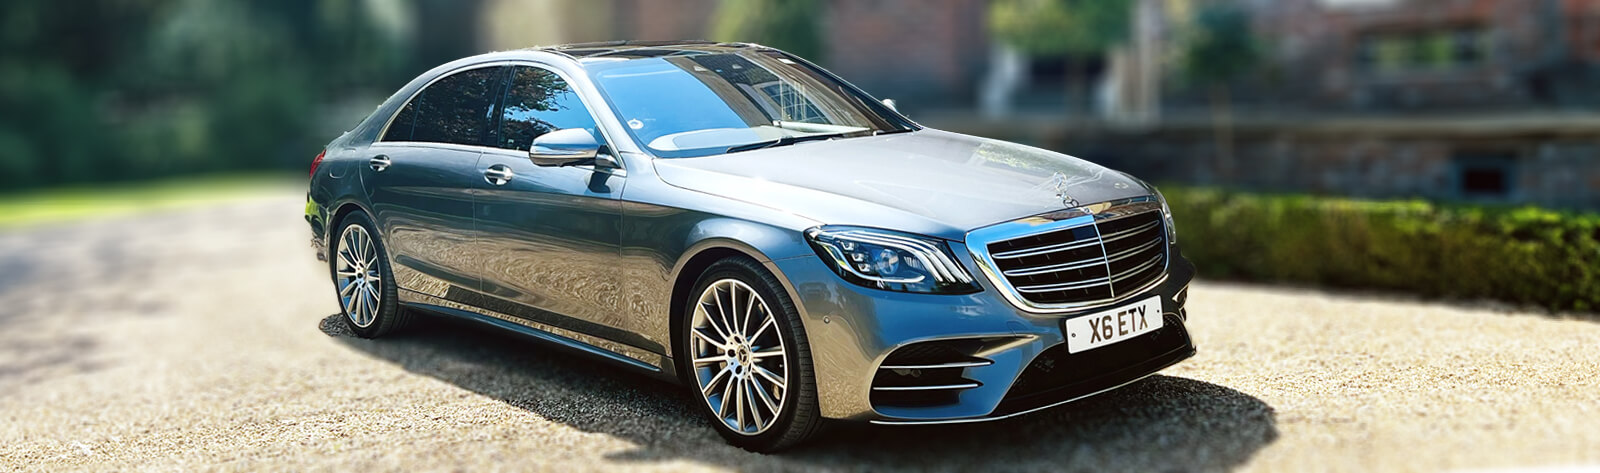 mercedes v class and mercedes s class Salford